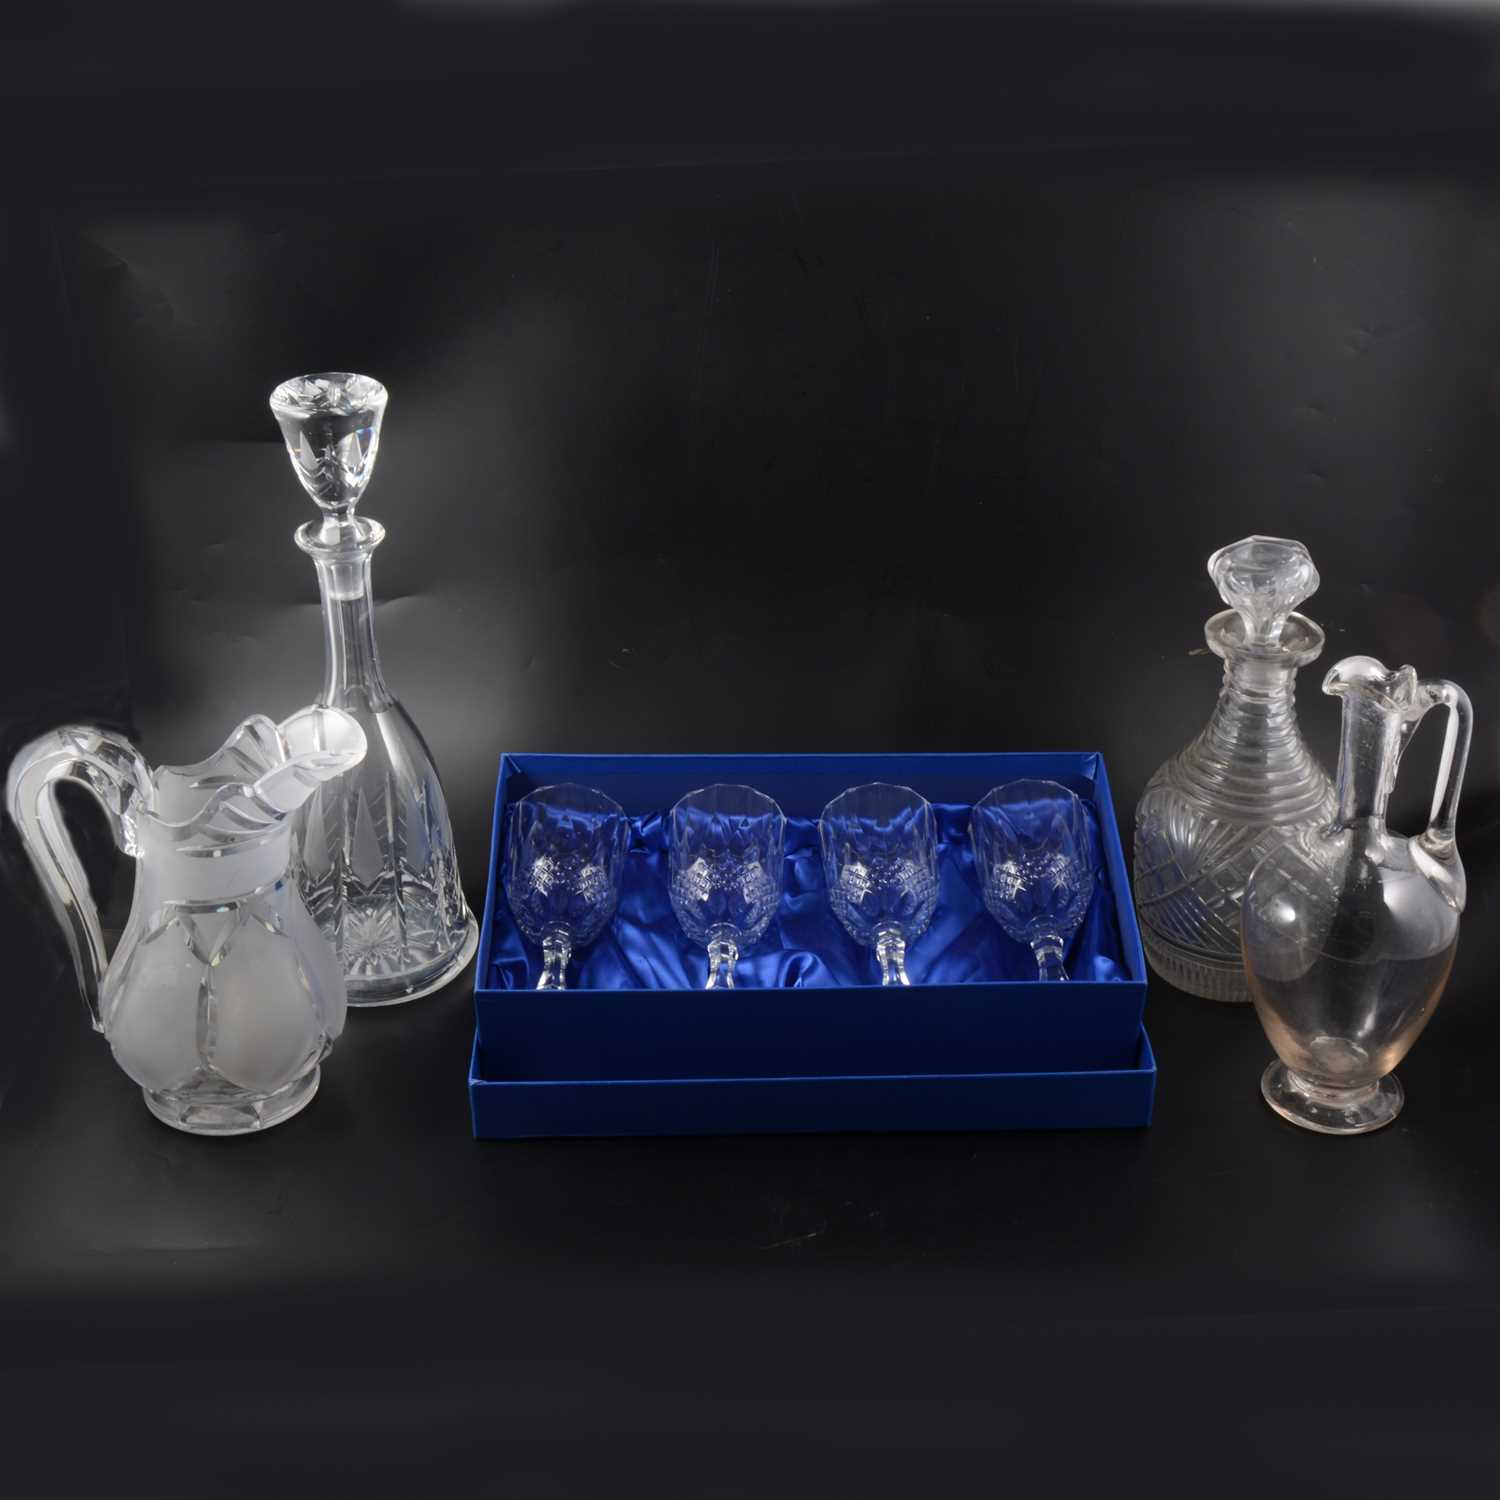 Lot 59 - A quantity of cut crystal glass decanters, jugs, and stemware.